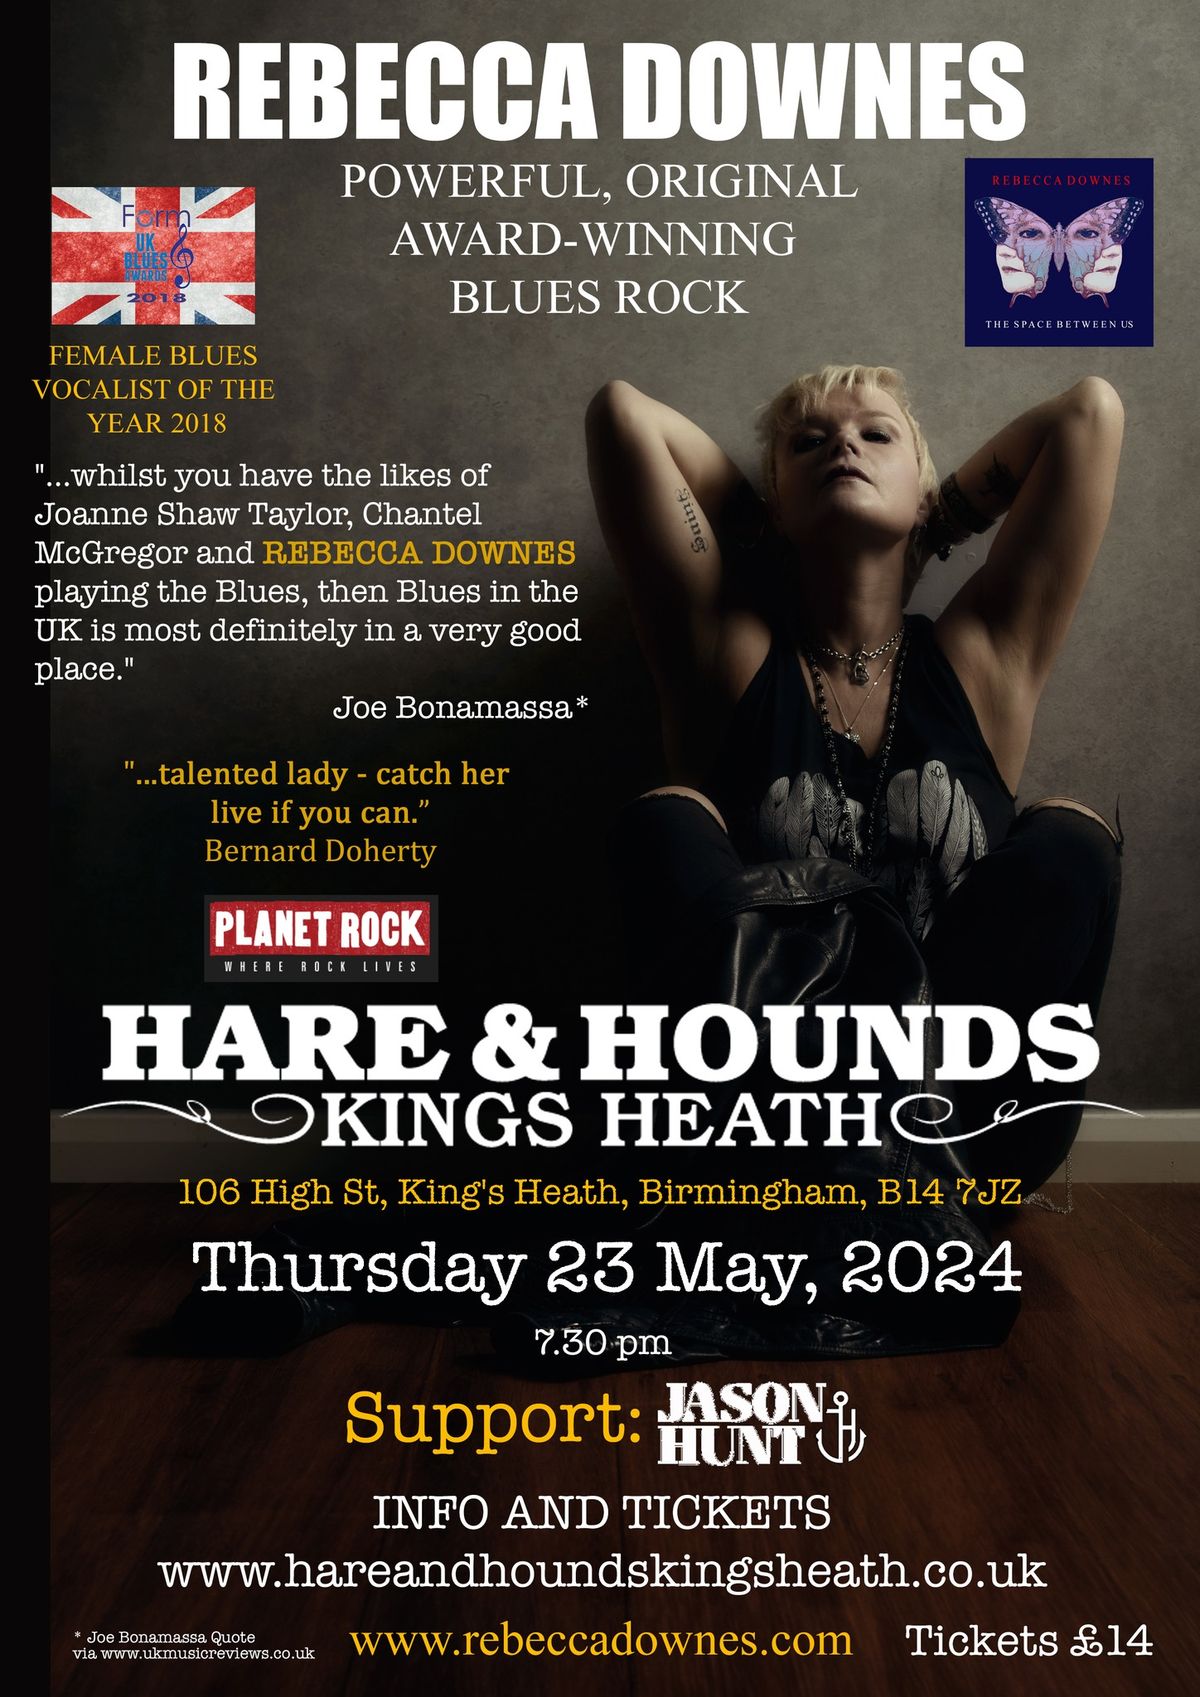 Rebecca Downes at the Hare & Hounds, Kings Heath, Birmingham with support from Jason Hunt